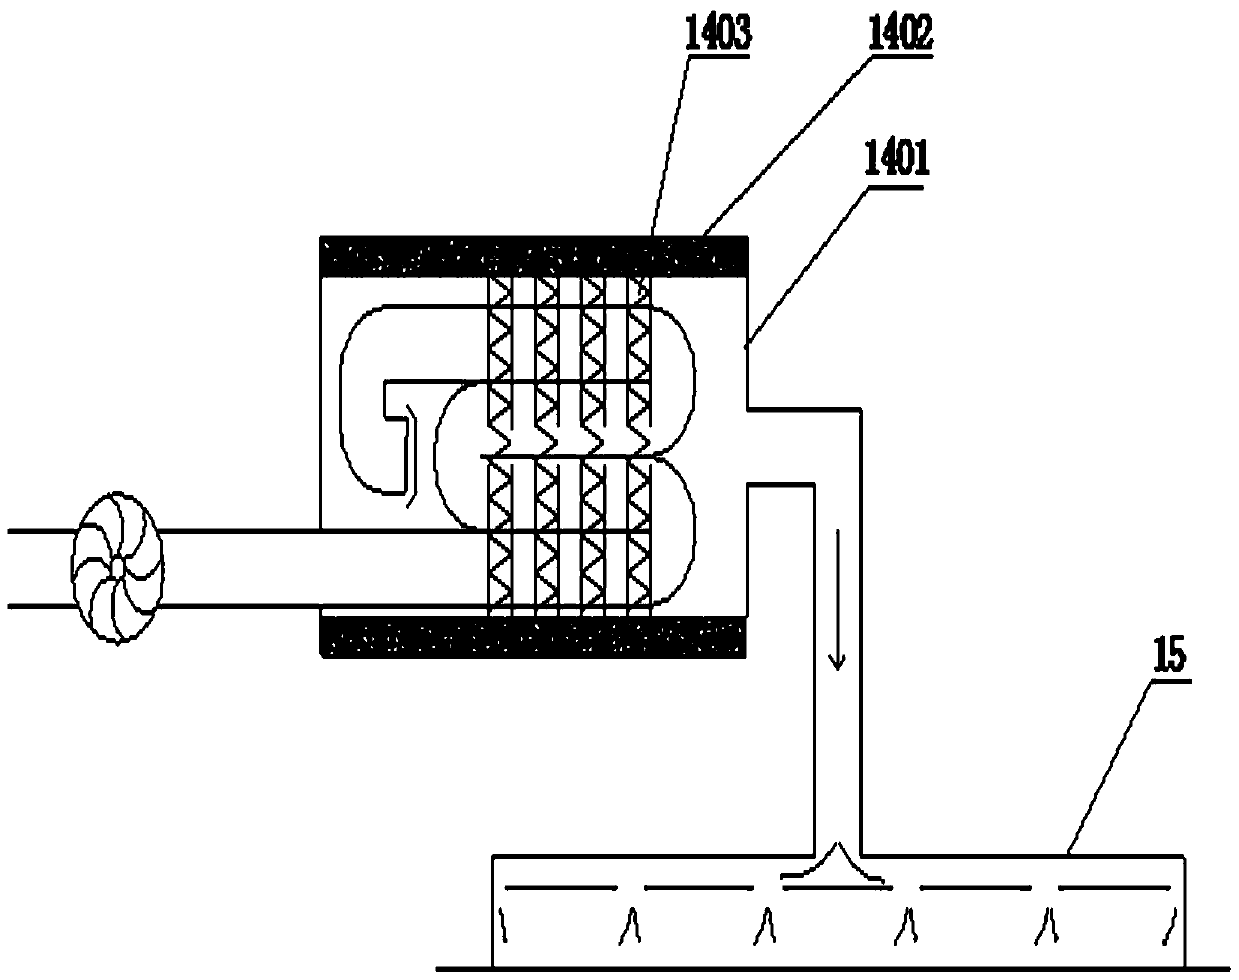 A centralized waste gas treatment device for in-situ thermal regeneration machines